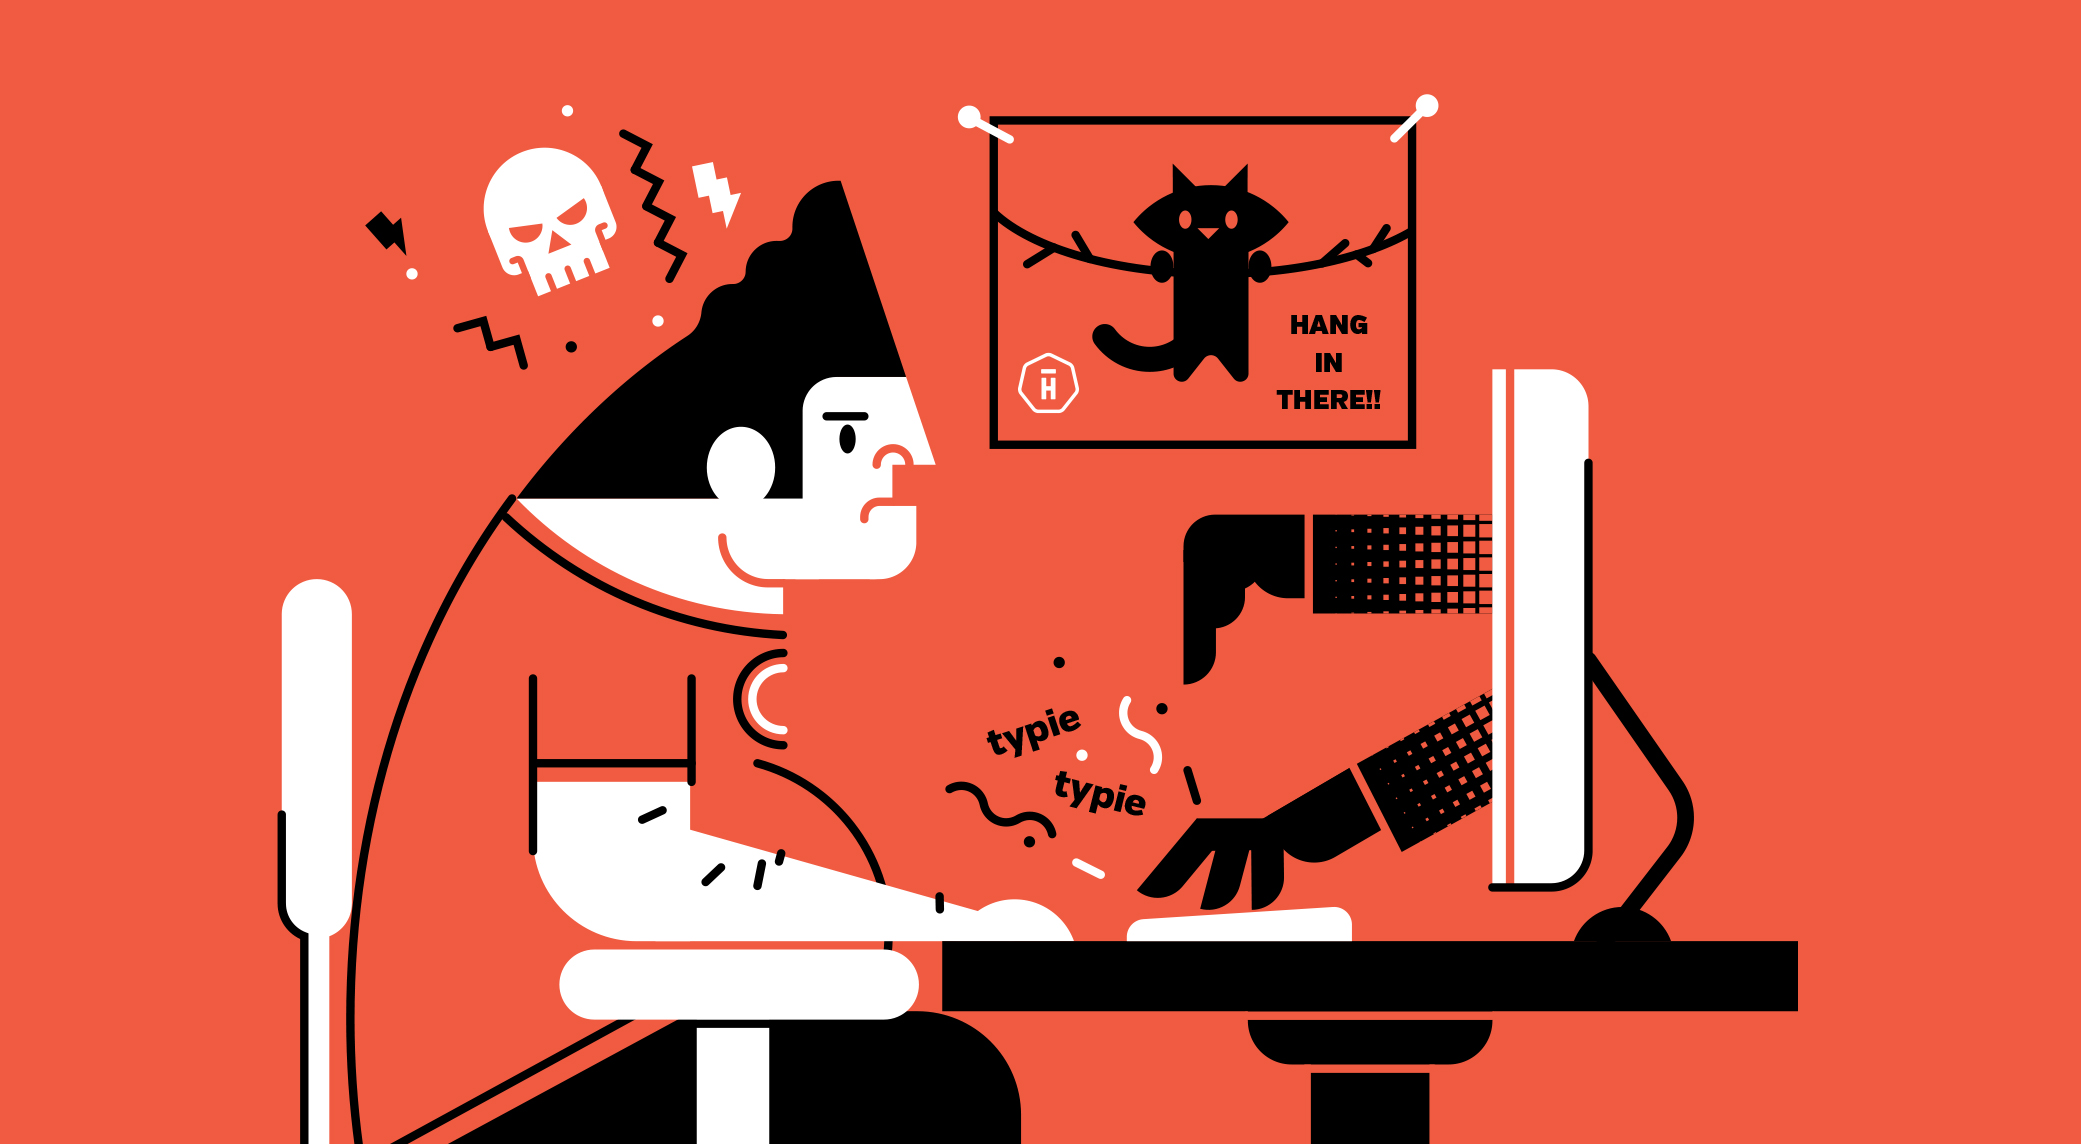 How to handle clients illustration by Luke Bott